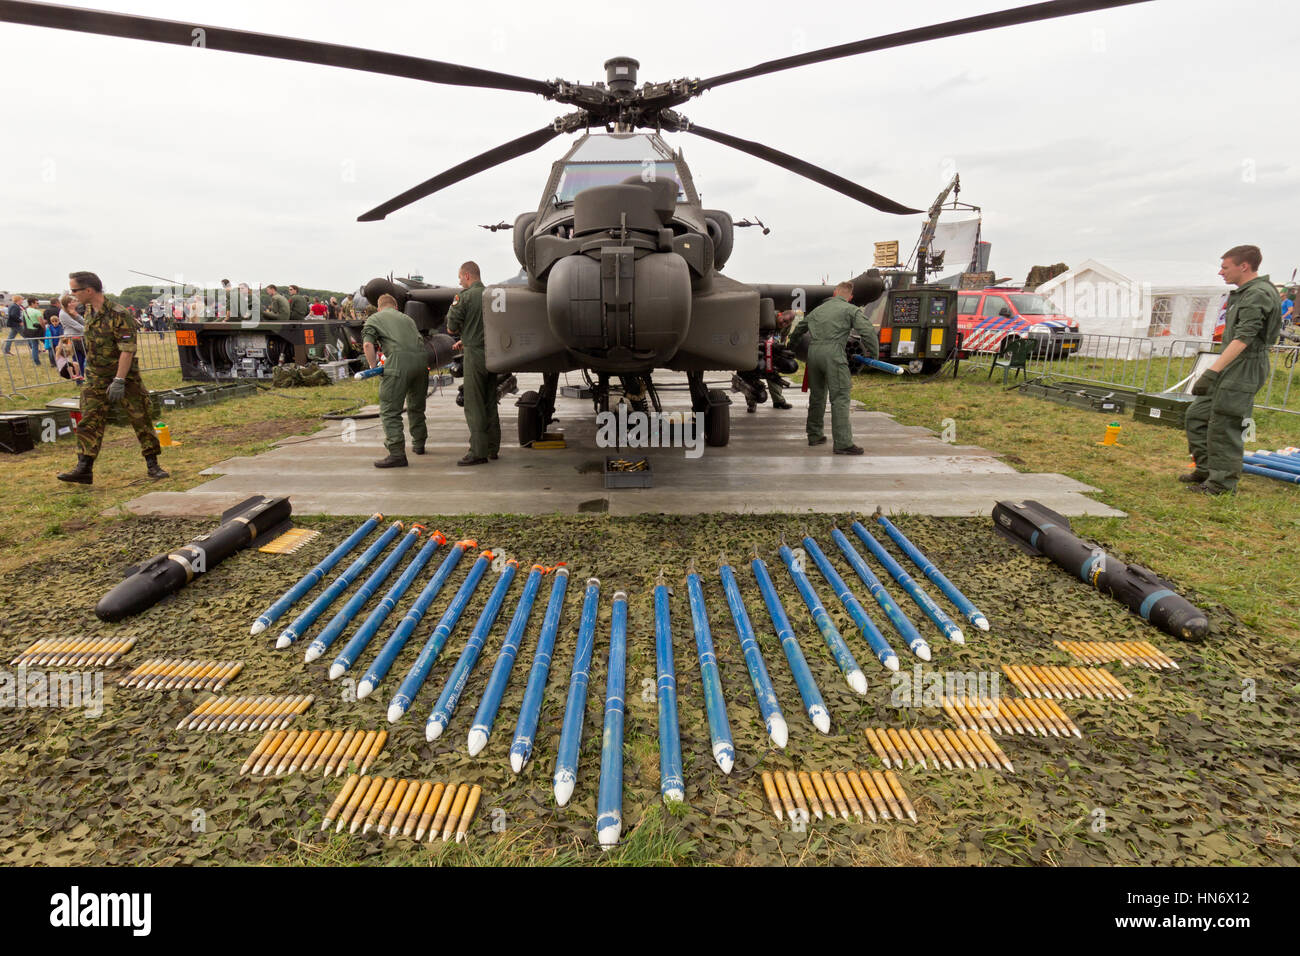 VOLKEL, NETHERLANDS - JUNE 14: Weaponry of a  Dutch Air Force AH-64 Apache on display at the Royal Netherlands Air Force Days June 14, 2013 in Volkel, Stock Photo